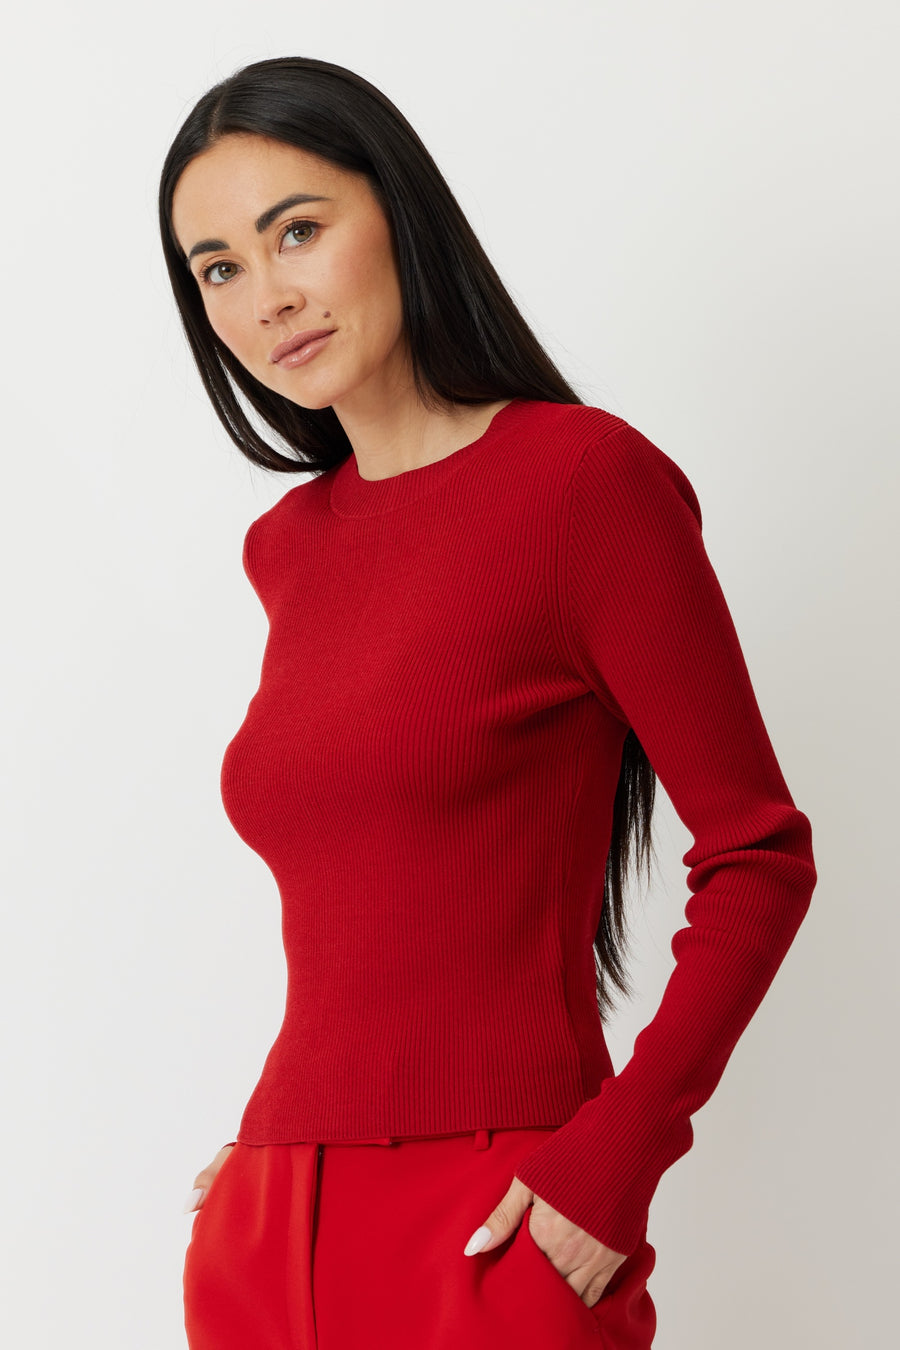 SWATCH THE GREGORY LONG SLEEVE KNIT TOP